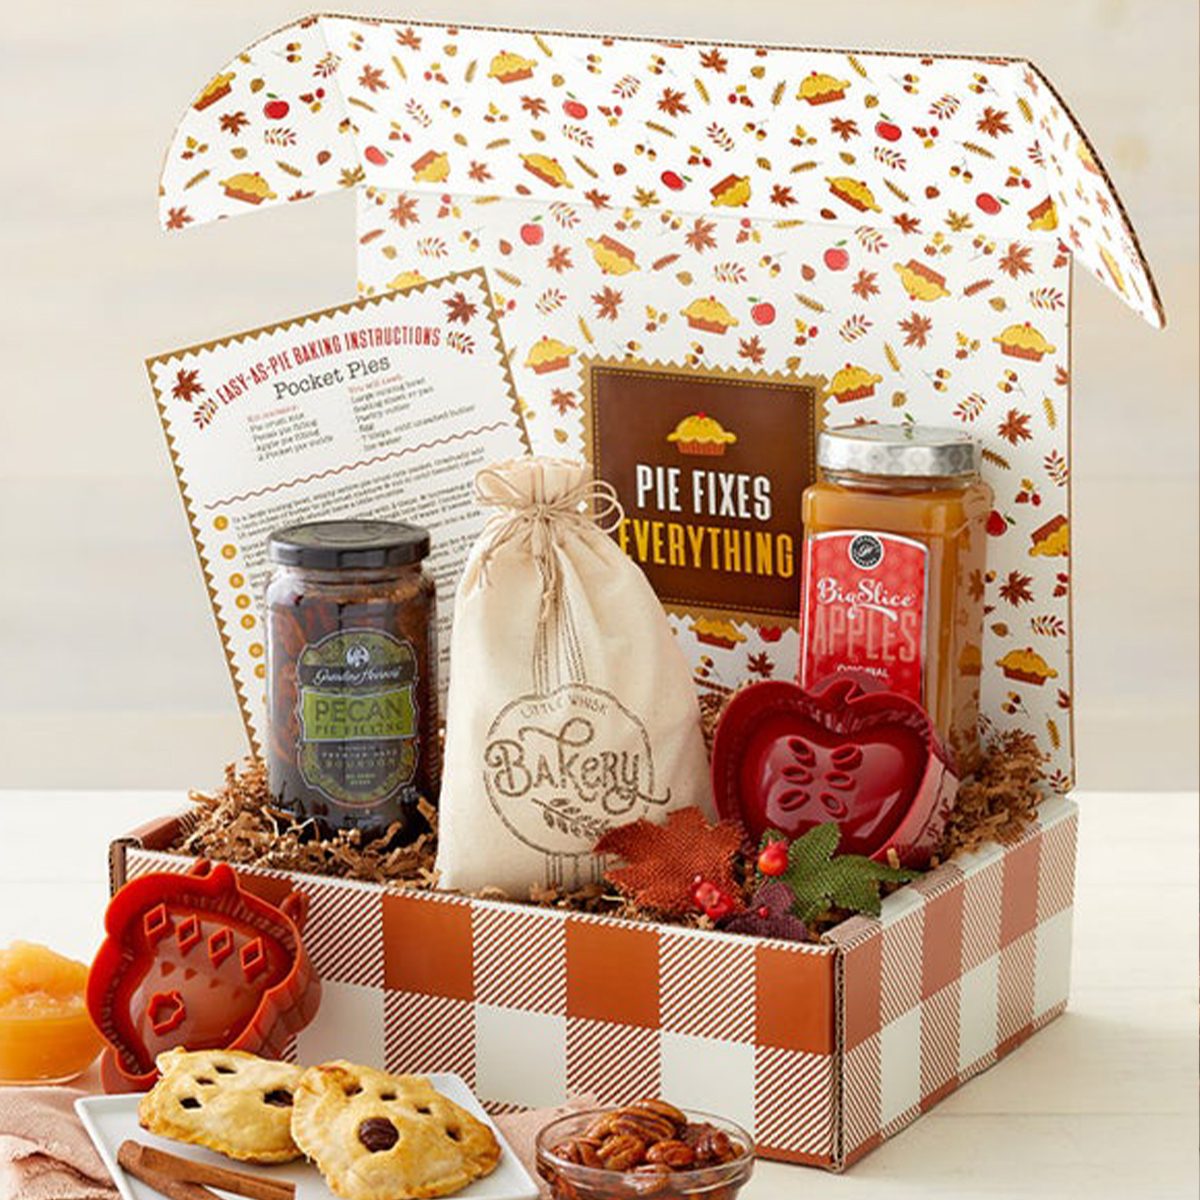 How to Assemble a DIY Fall Baking Themed Gift Basket